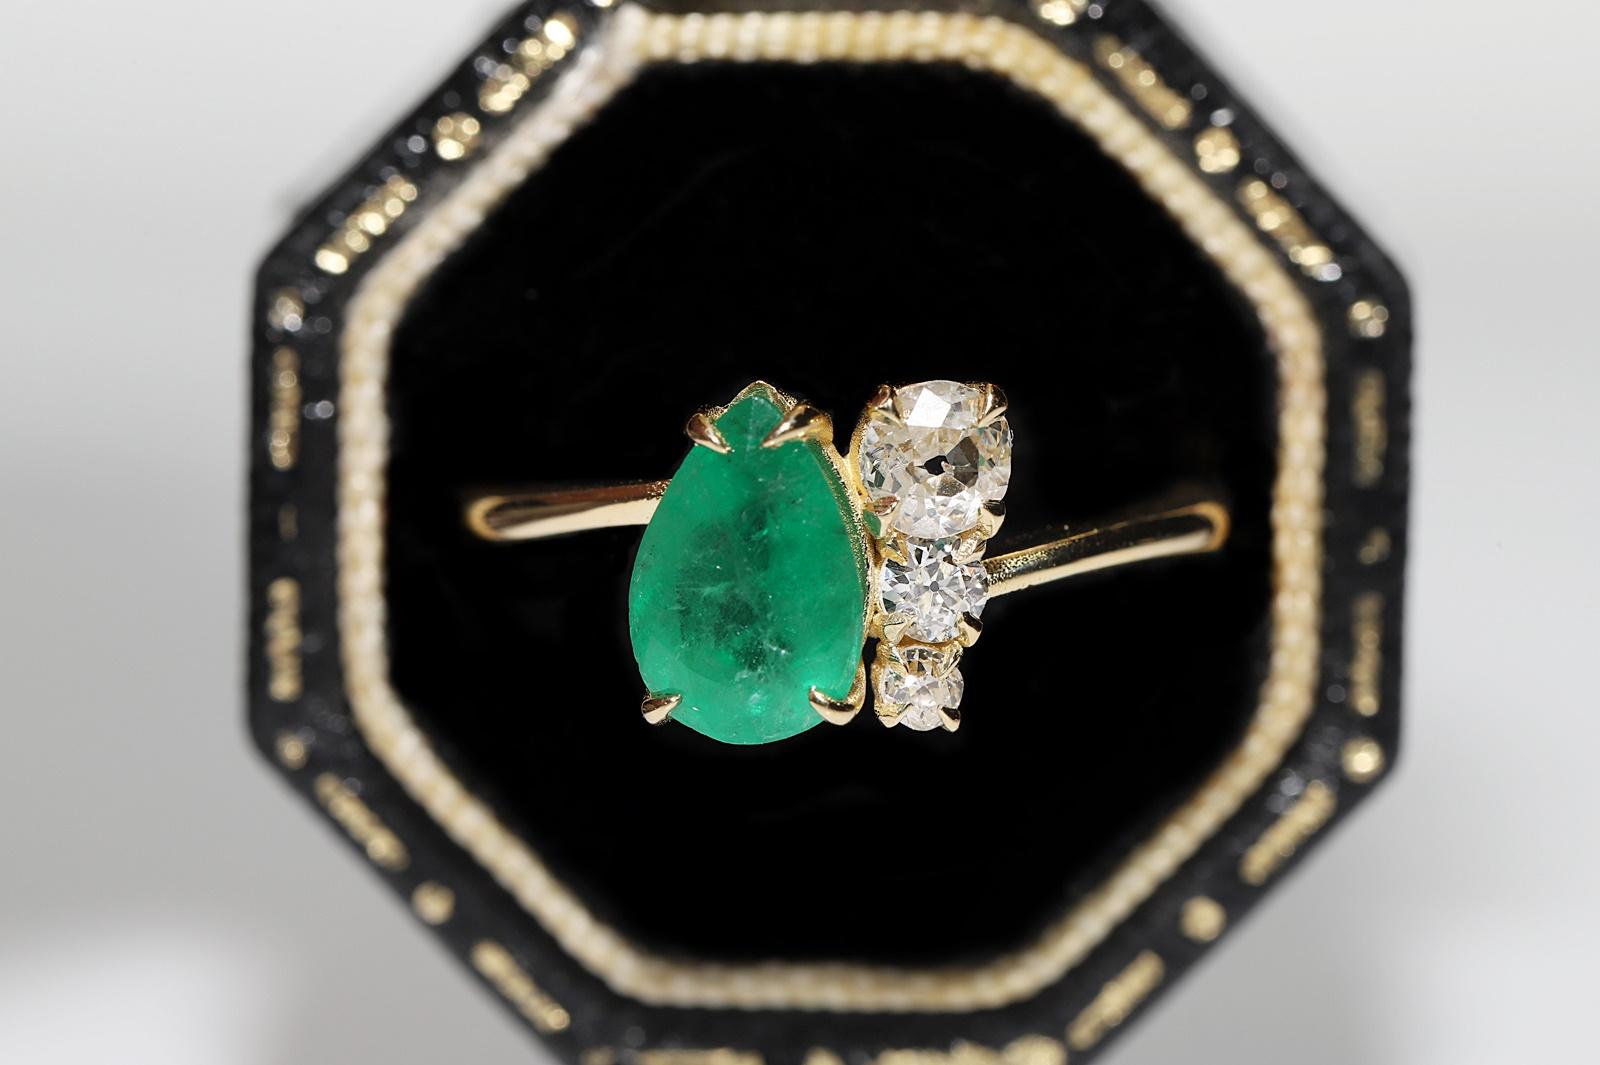 In very good condition.
Total weight is 3 grams.
Totally is diamond 0.32 ct.
The diamond is has H color and vs clarity.
Totally is emerald 1.12 ct.
Ring size is US 6.5 (We offer free resizing)
We can make any size.
Box is not included.
Please